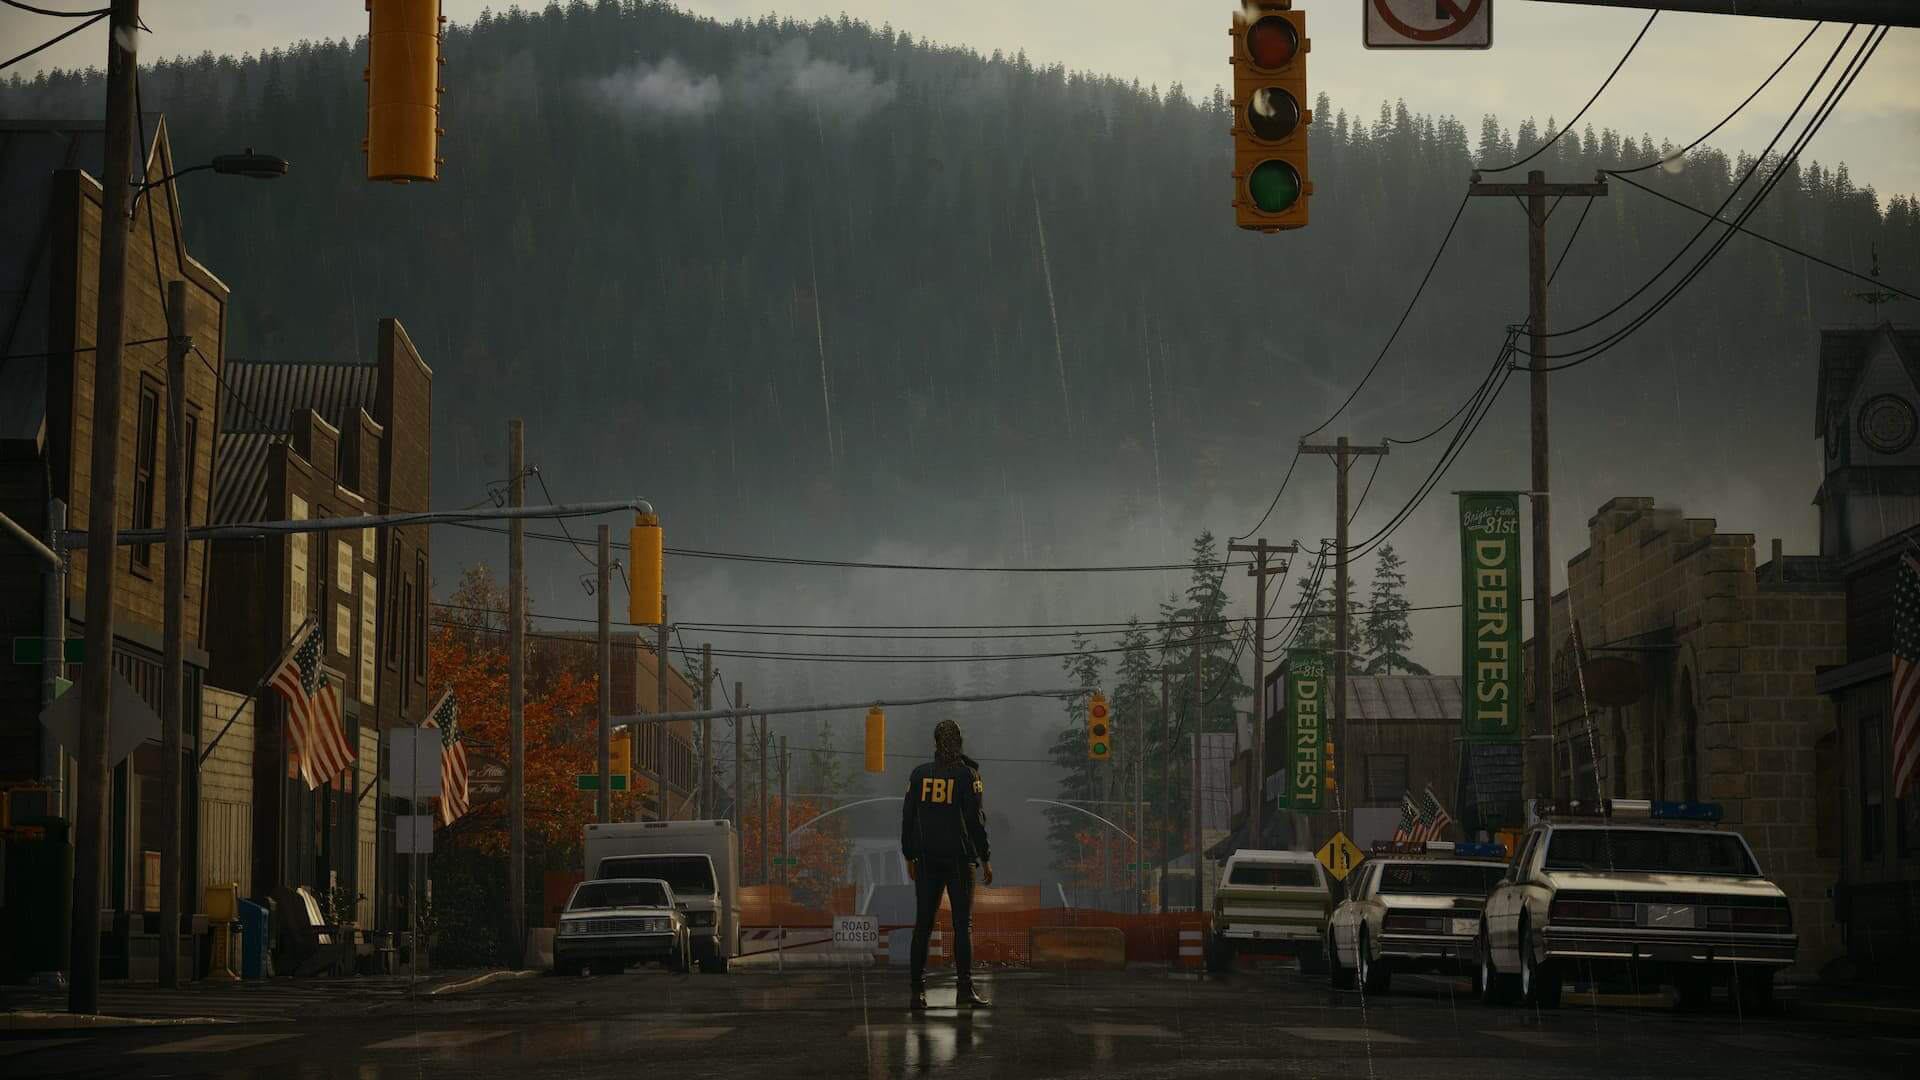 Alan Wake 2 PC: how demanding is it - and what hardware do you need?